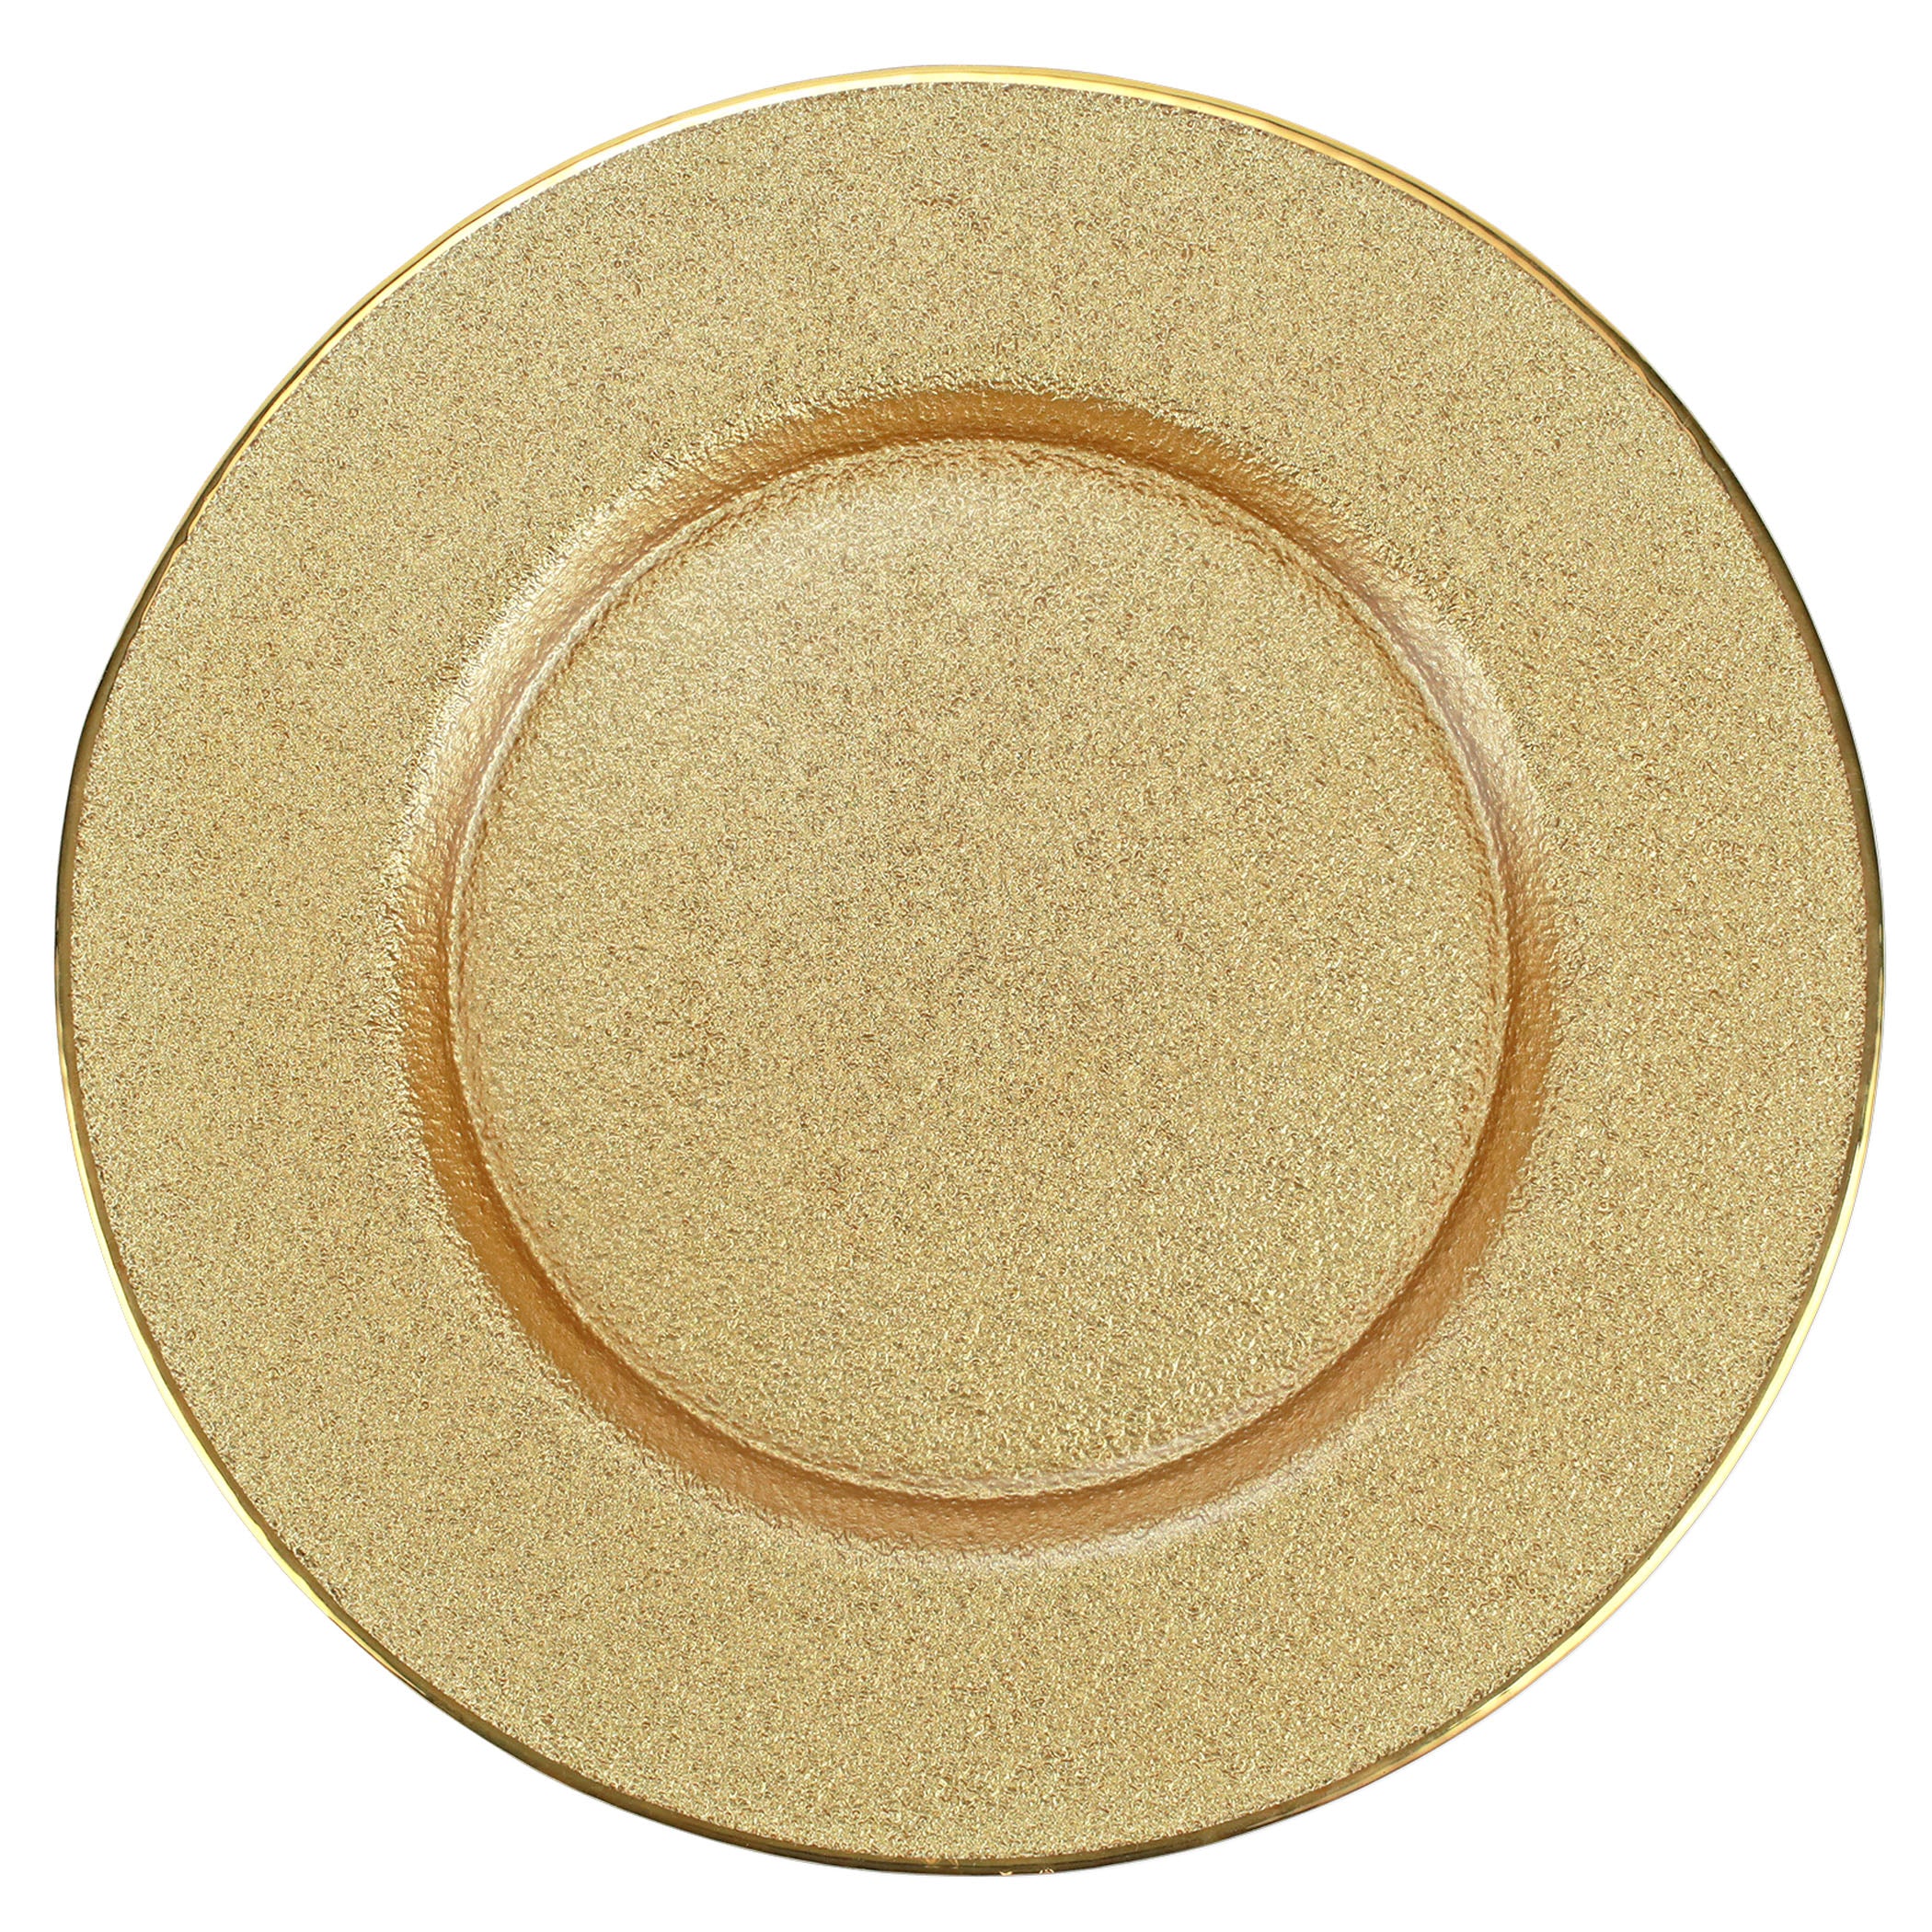 Metallic Glass Gold Service Plate/Charger